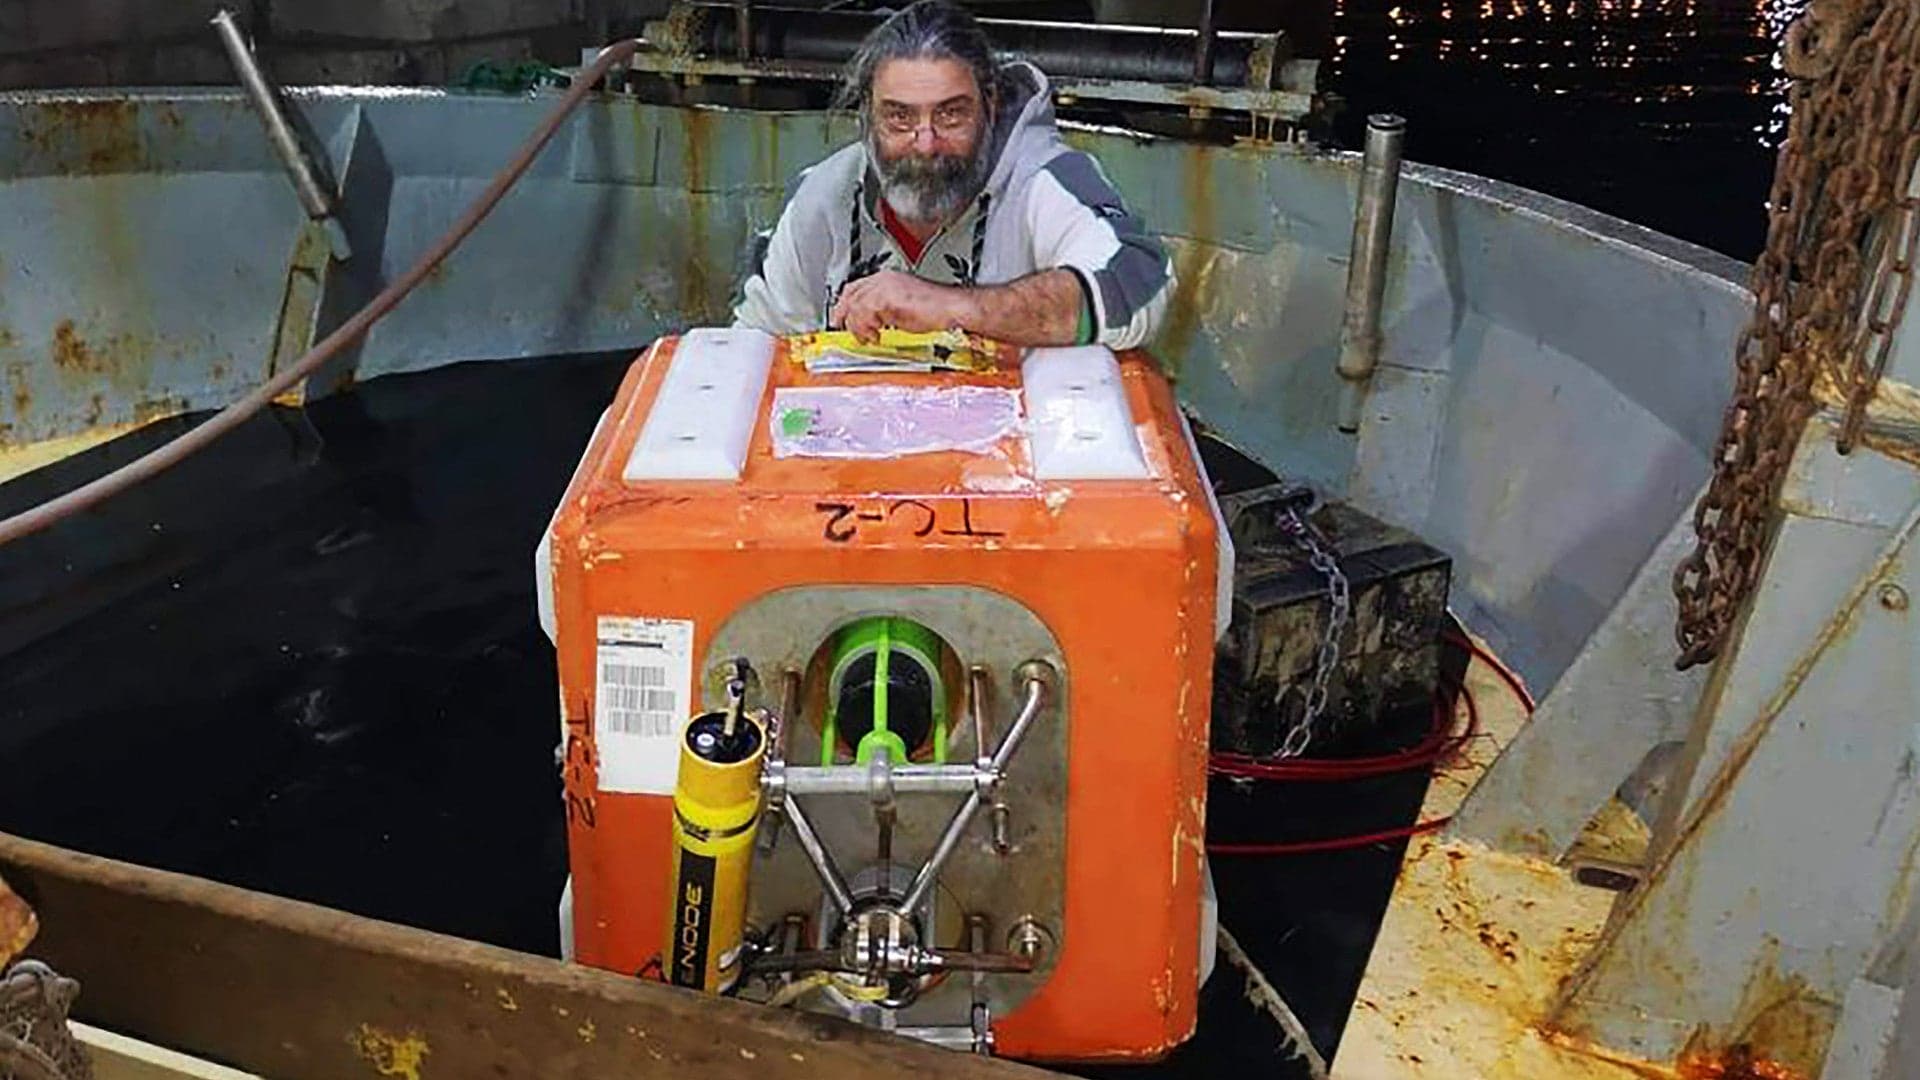 Here’s The Story Behind That Mysterious Navy “Cube” Croatian Fishermen Pulled From The Sea